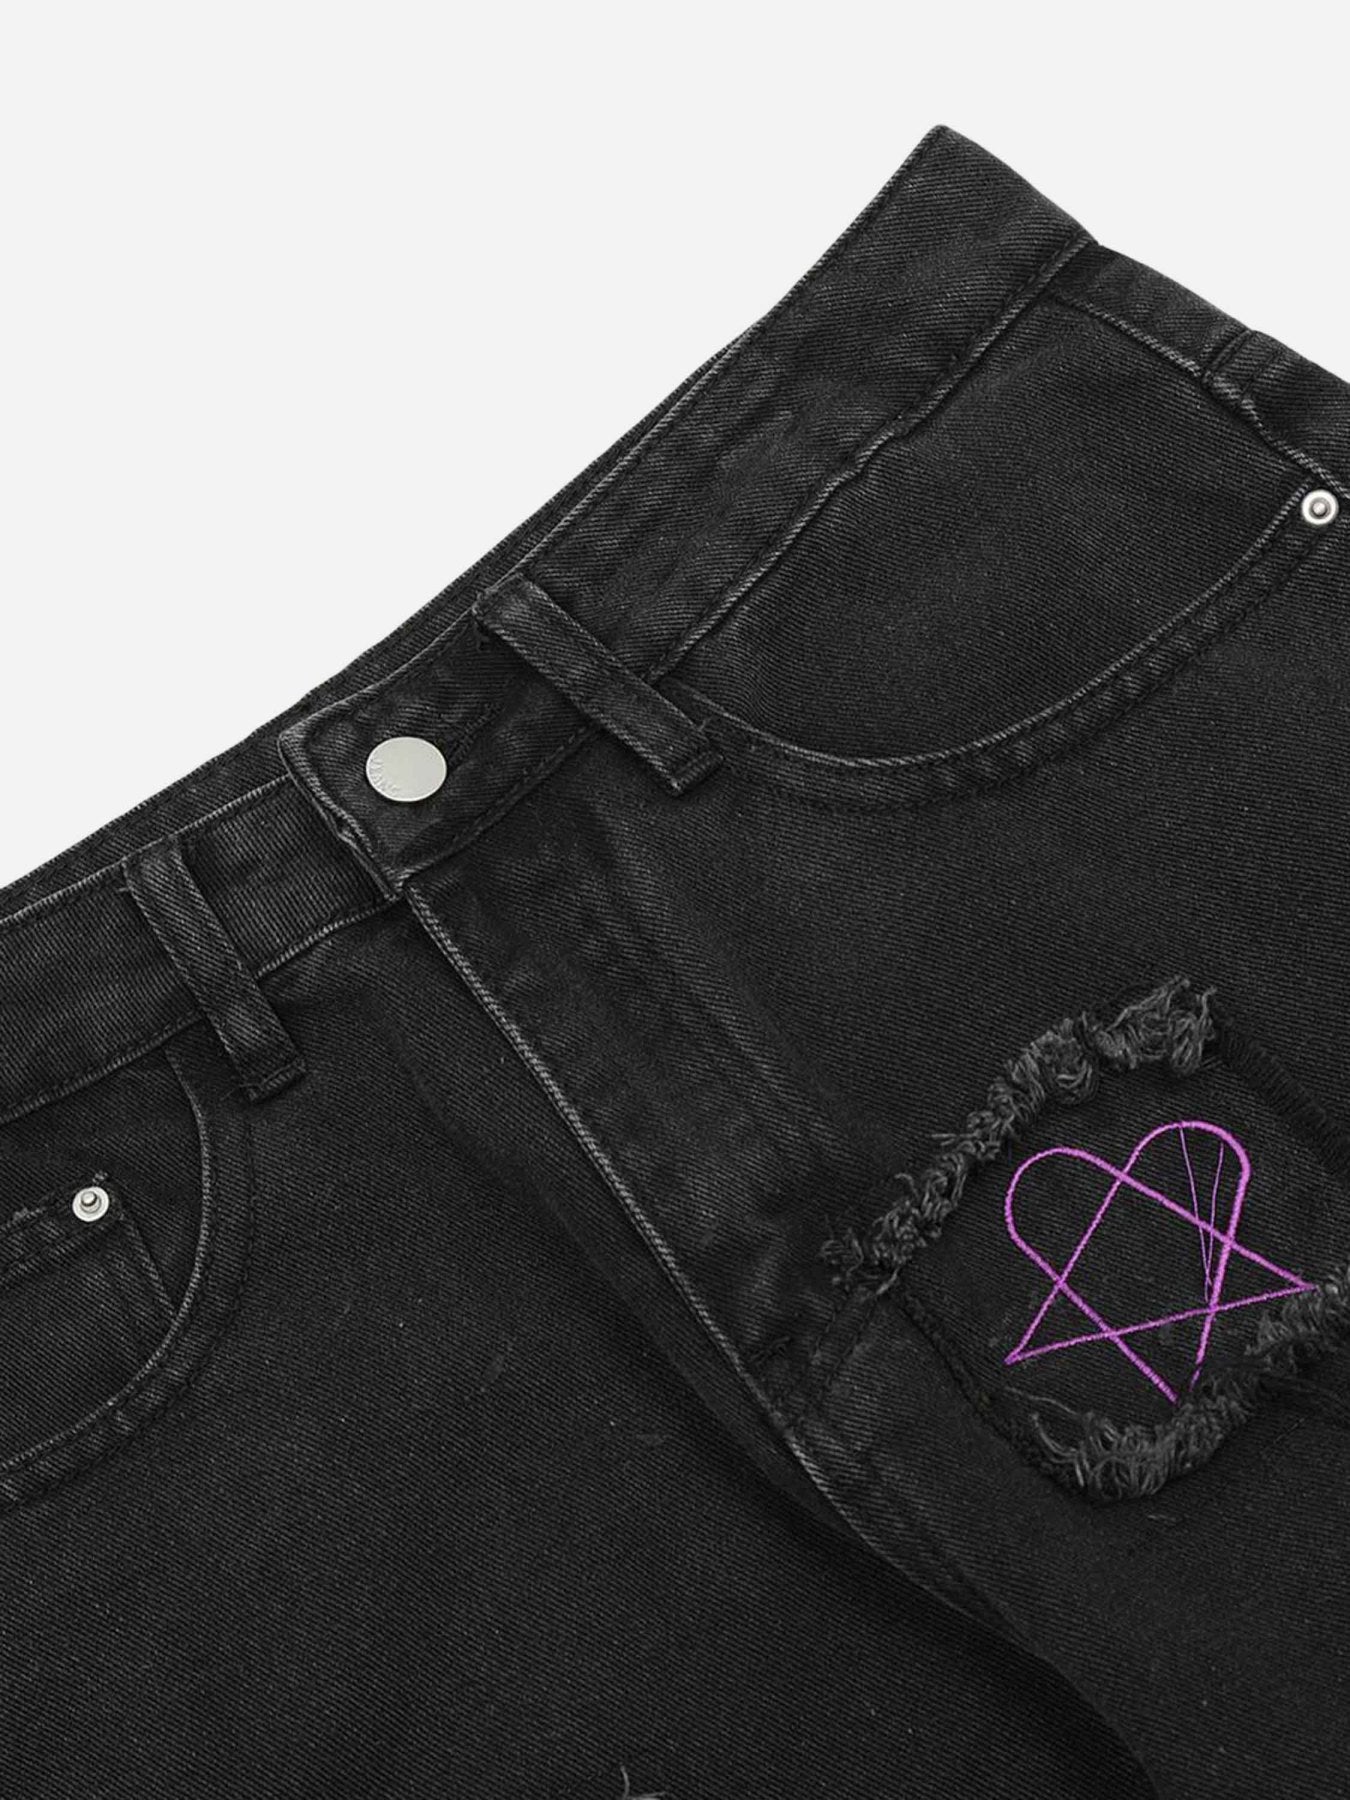 The Supermade Highest Quality Casual Jeans With Holes